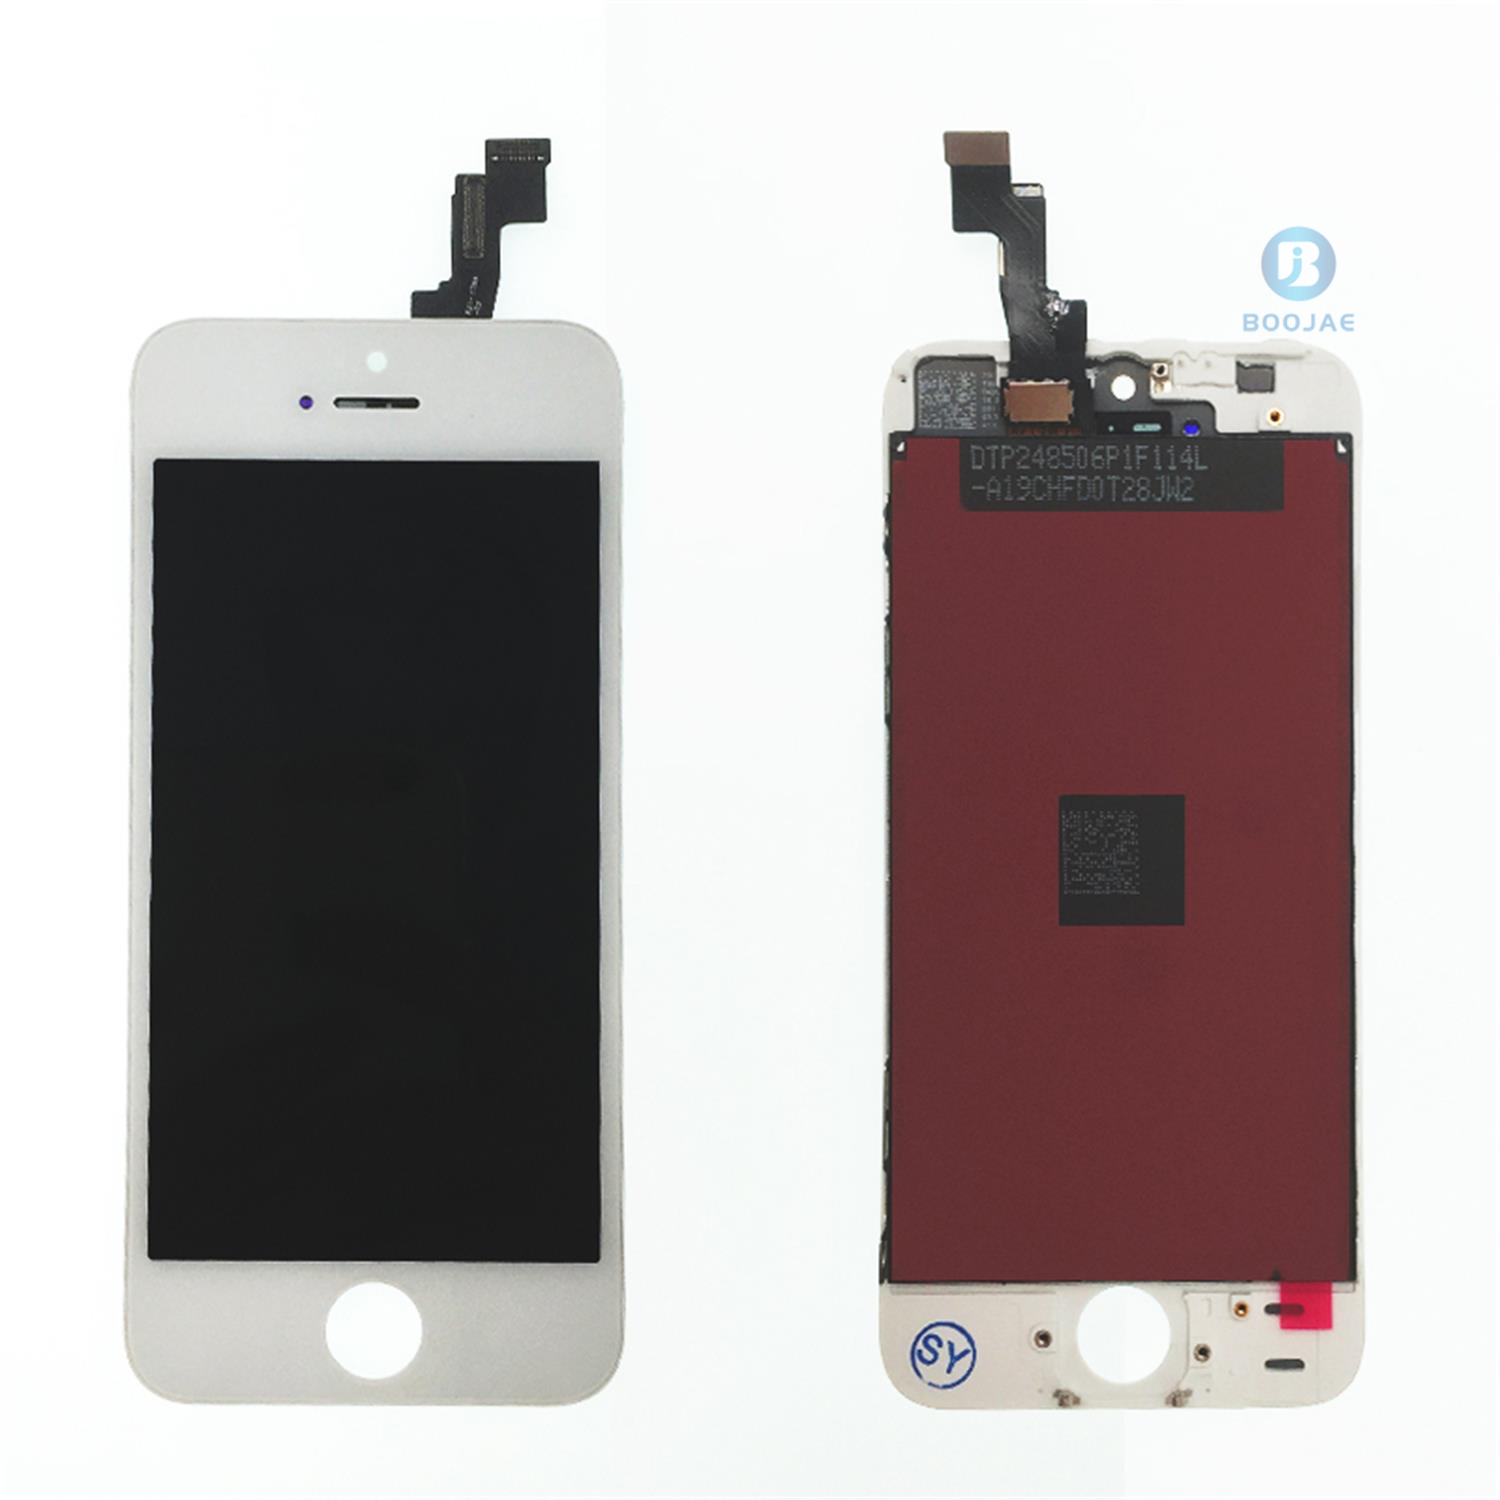 iPhone 5S LCD Screen Display and Wholesale iPhone Screens